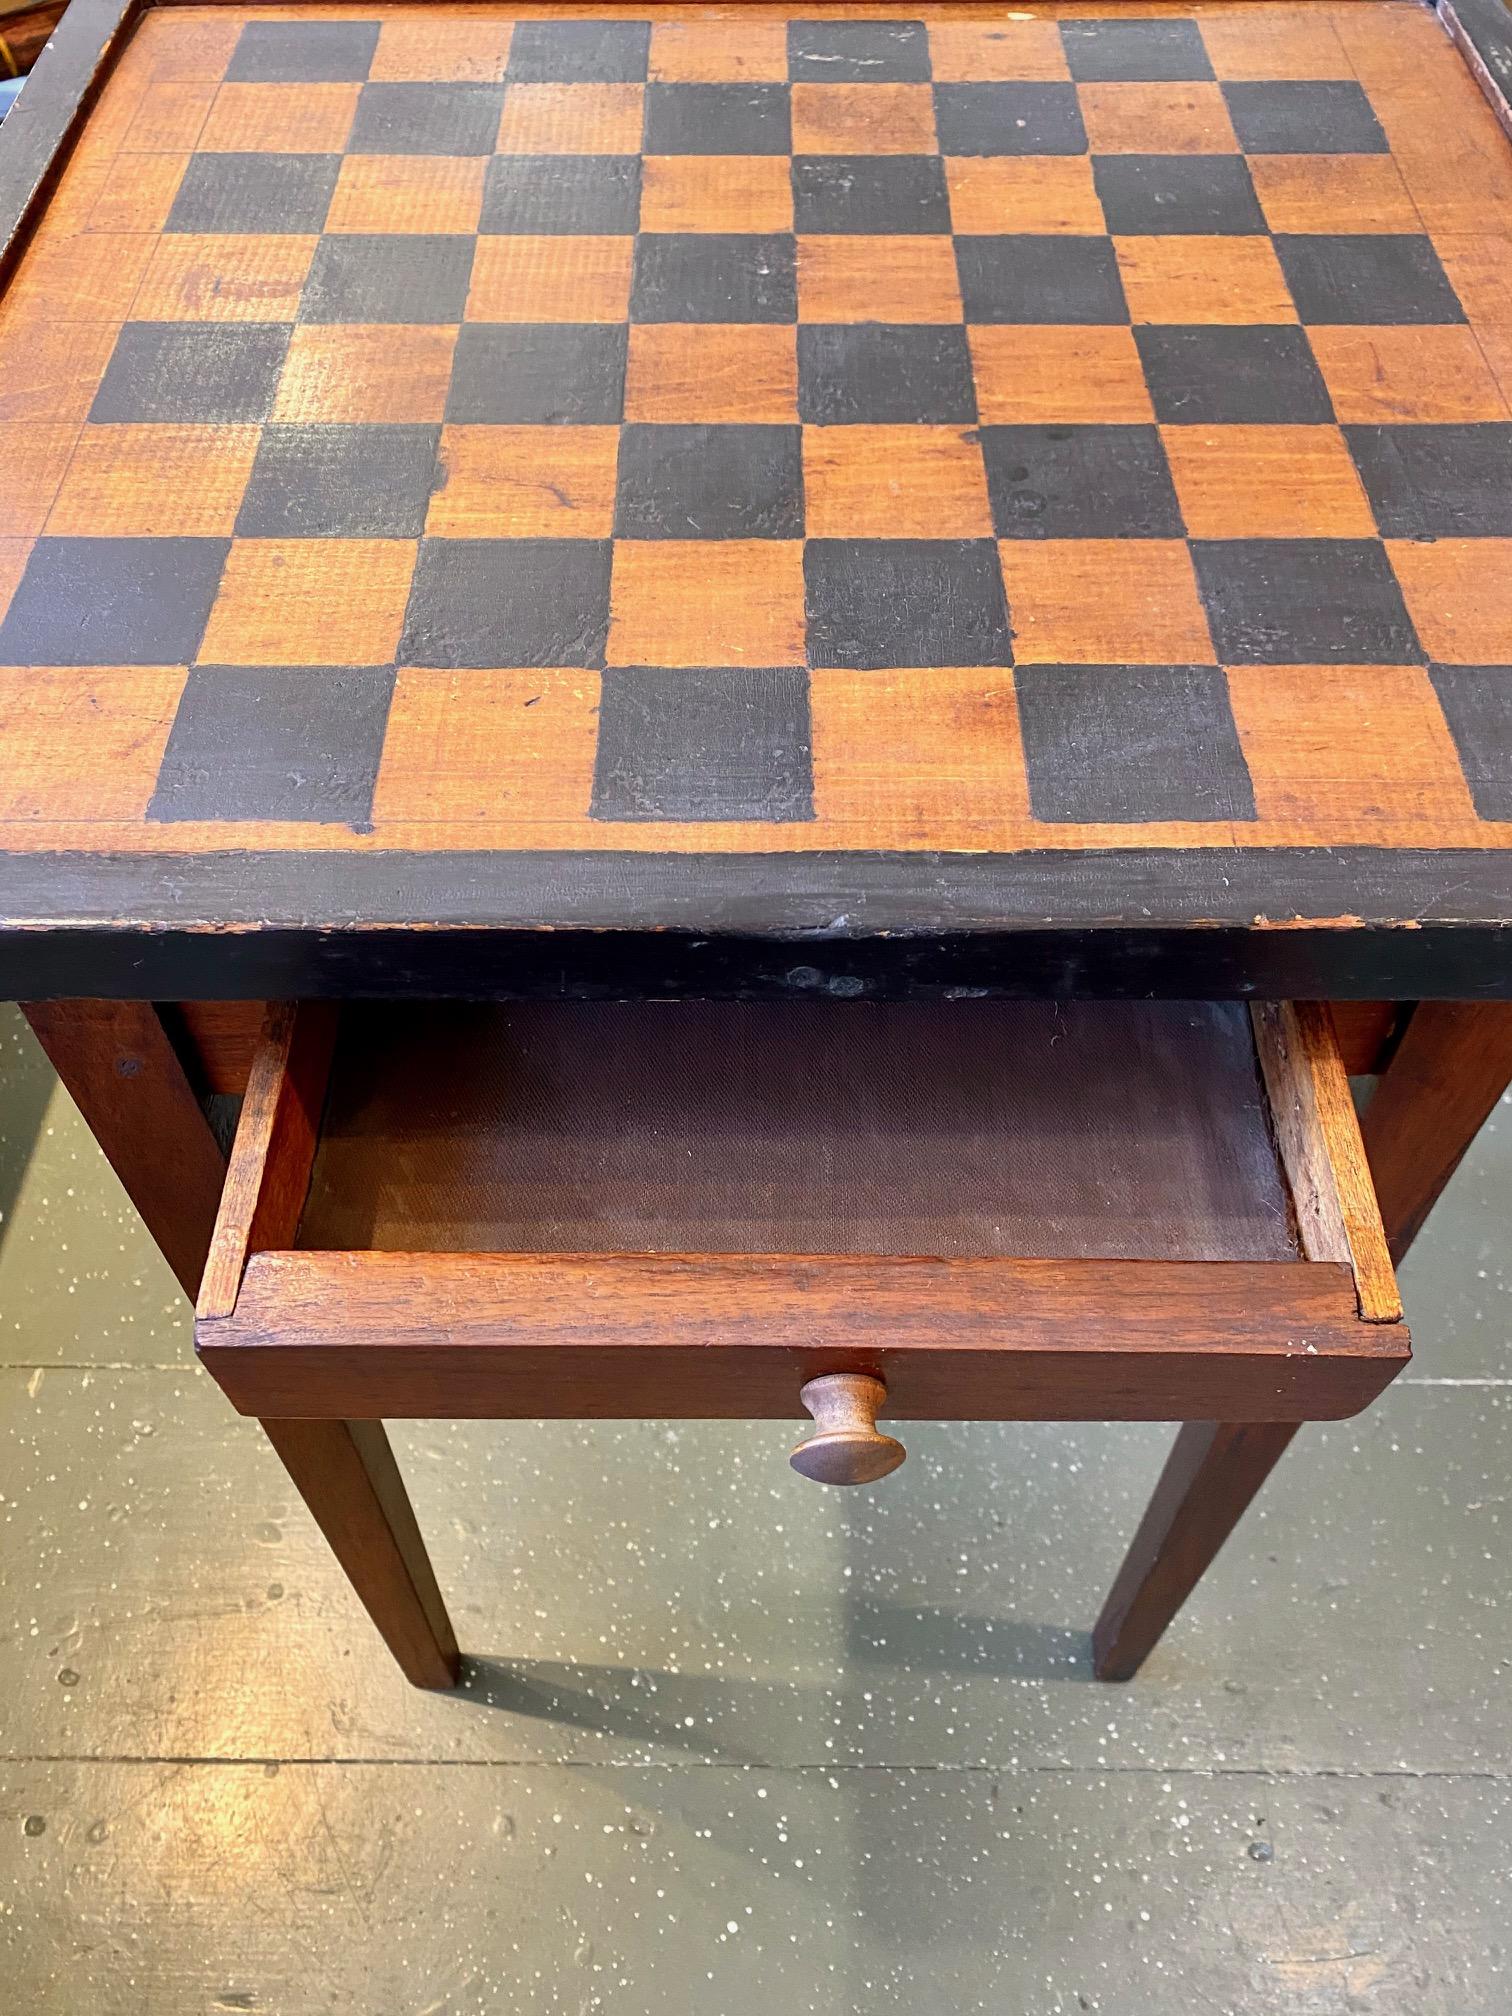 Mid to Late 19th Century rustic painted game table, a country Hepplewhite style game stand with painted checkerboard top enclosed within shallow raised gallery, above opposing narrow drawers, raised on tapering square legs. The unique opposing